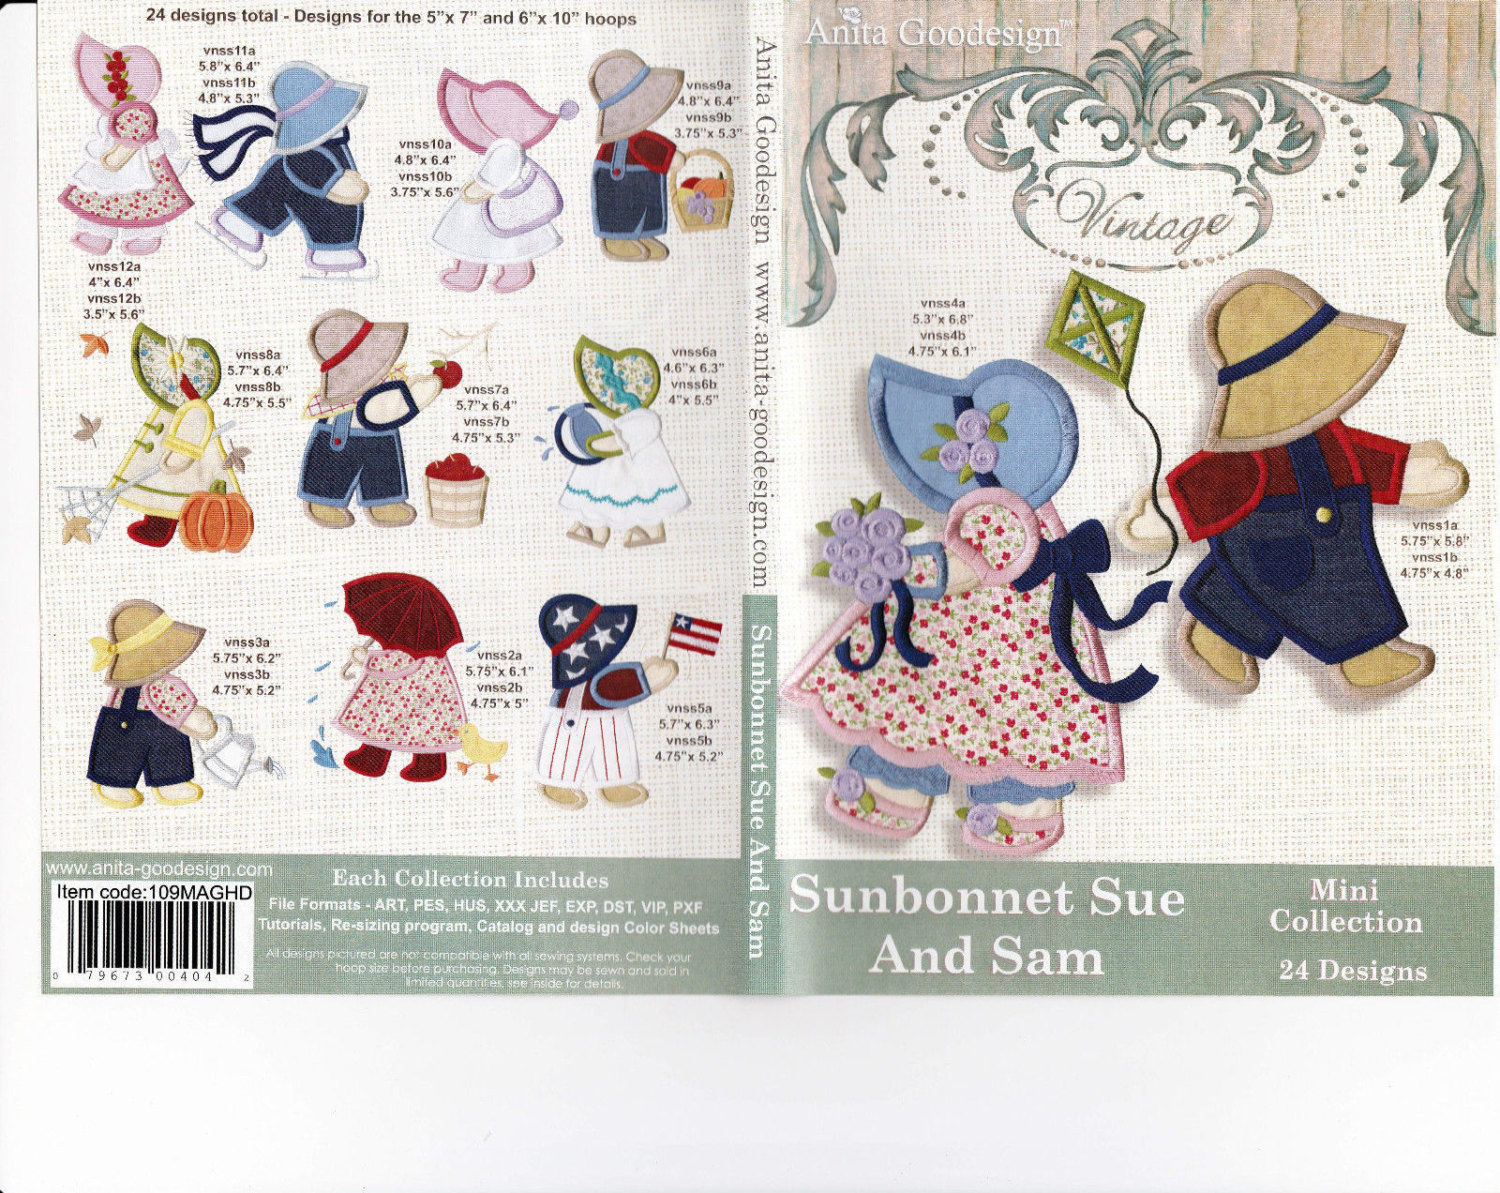 Sunbonnet Sue Embroidery Patterns Free Sunbonnet Sue And Sam Anita Goodesign Embroidery Designs